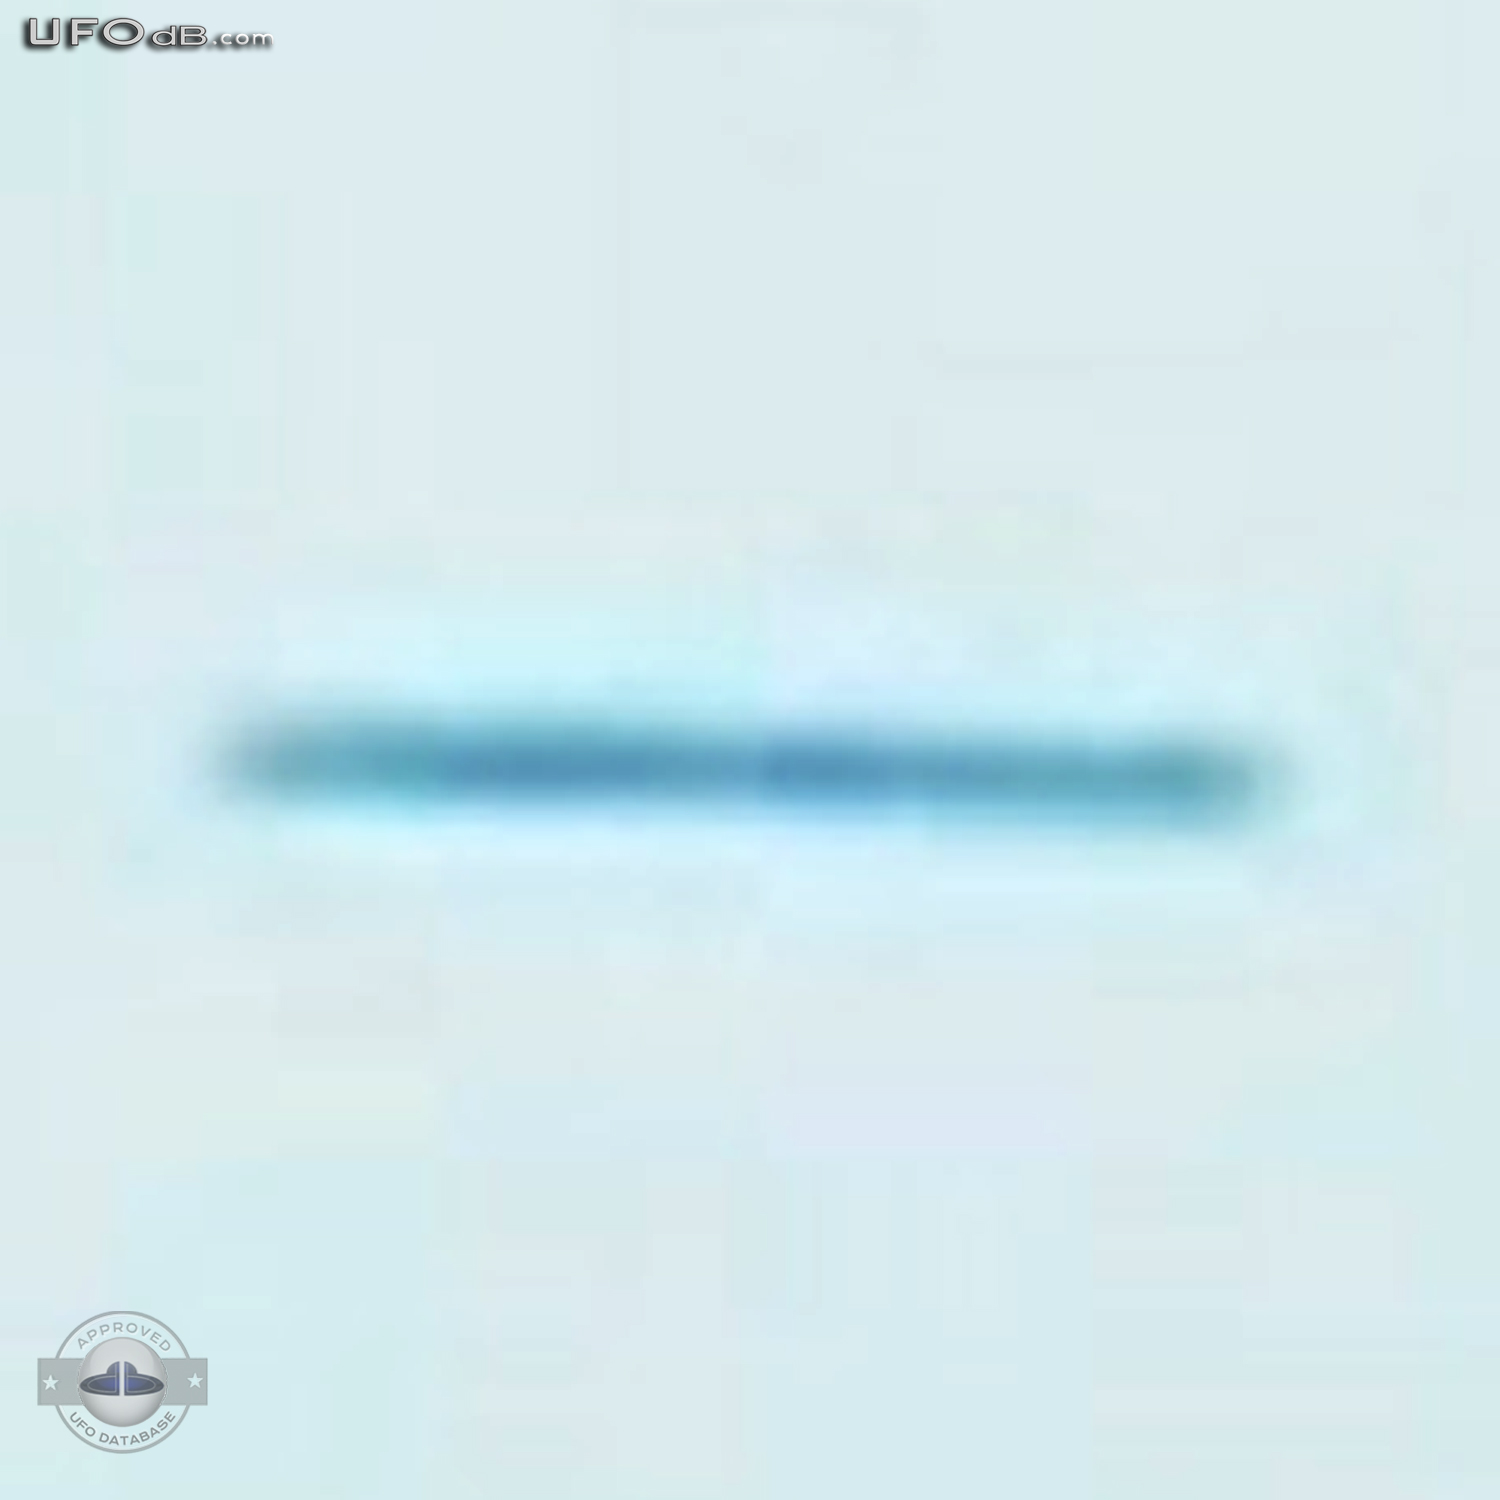 Washington No Fly Zone visited by a UFO | D.C. USA | February 14 2011 UFO Picture #258-5